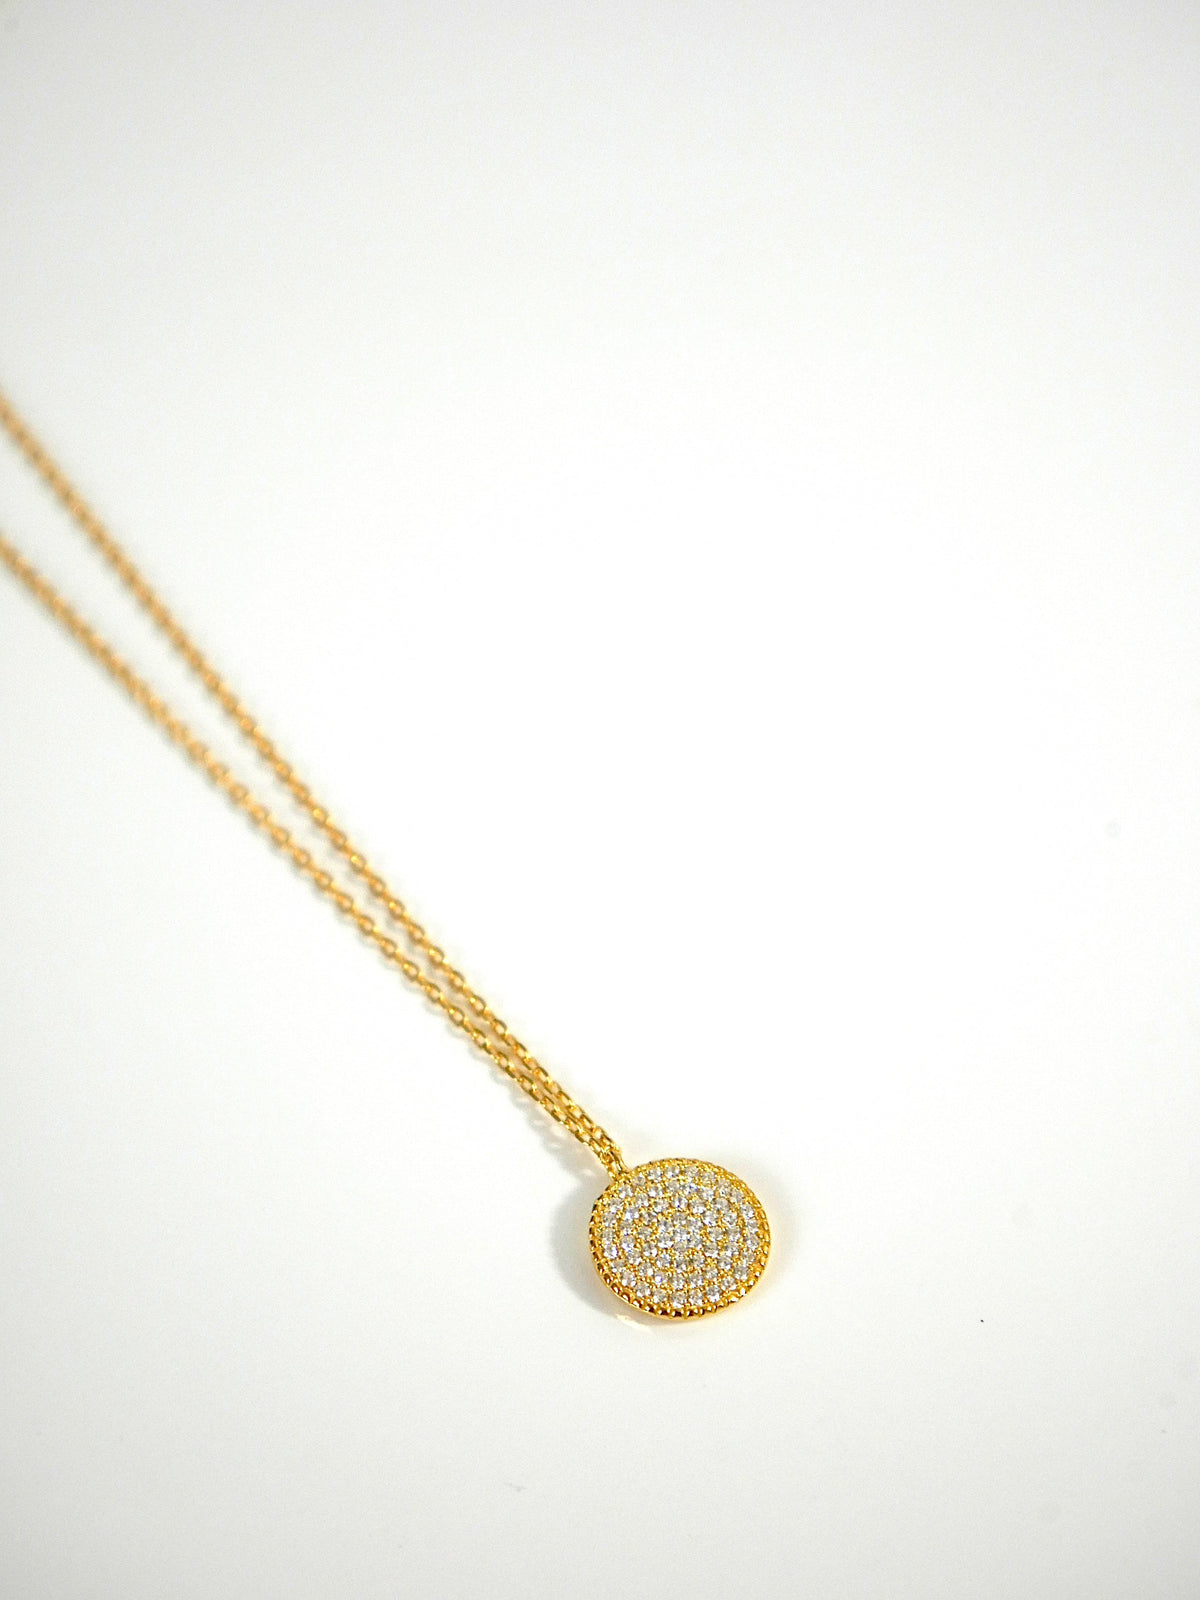 necklaces, gold plated, rhinestone, pave cz cubic zirconia, circle necklaces, coin, dainty, waterproof, hypoallergenic, popular, dainty, influencer style casual necklaces Kesley Boutique